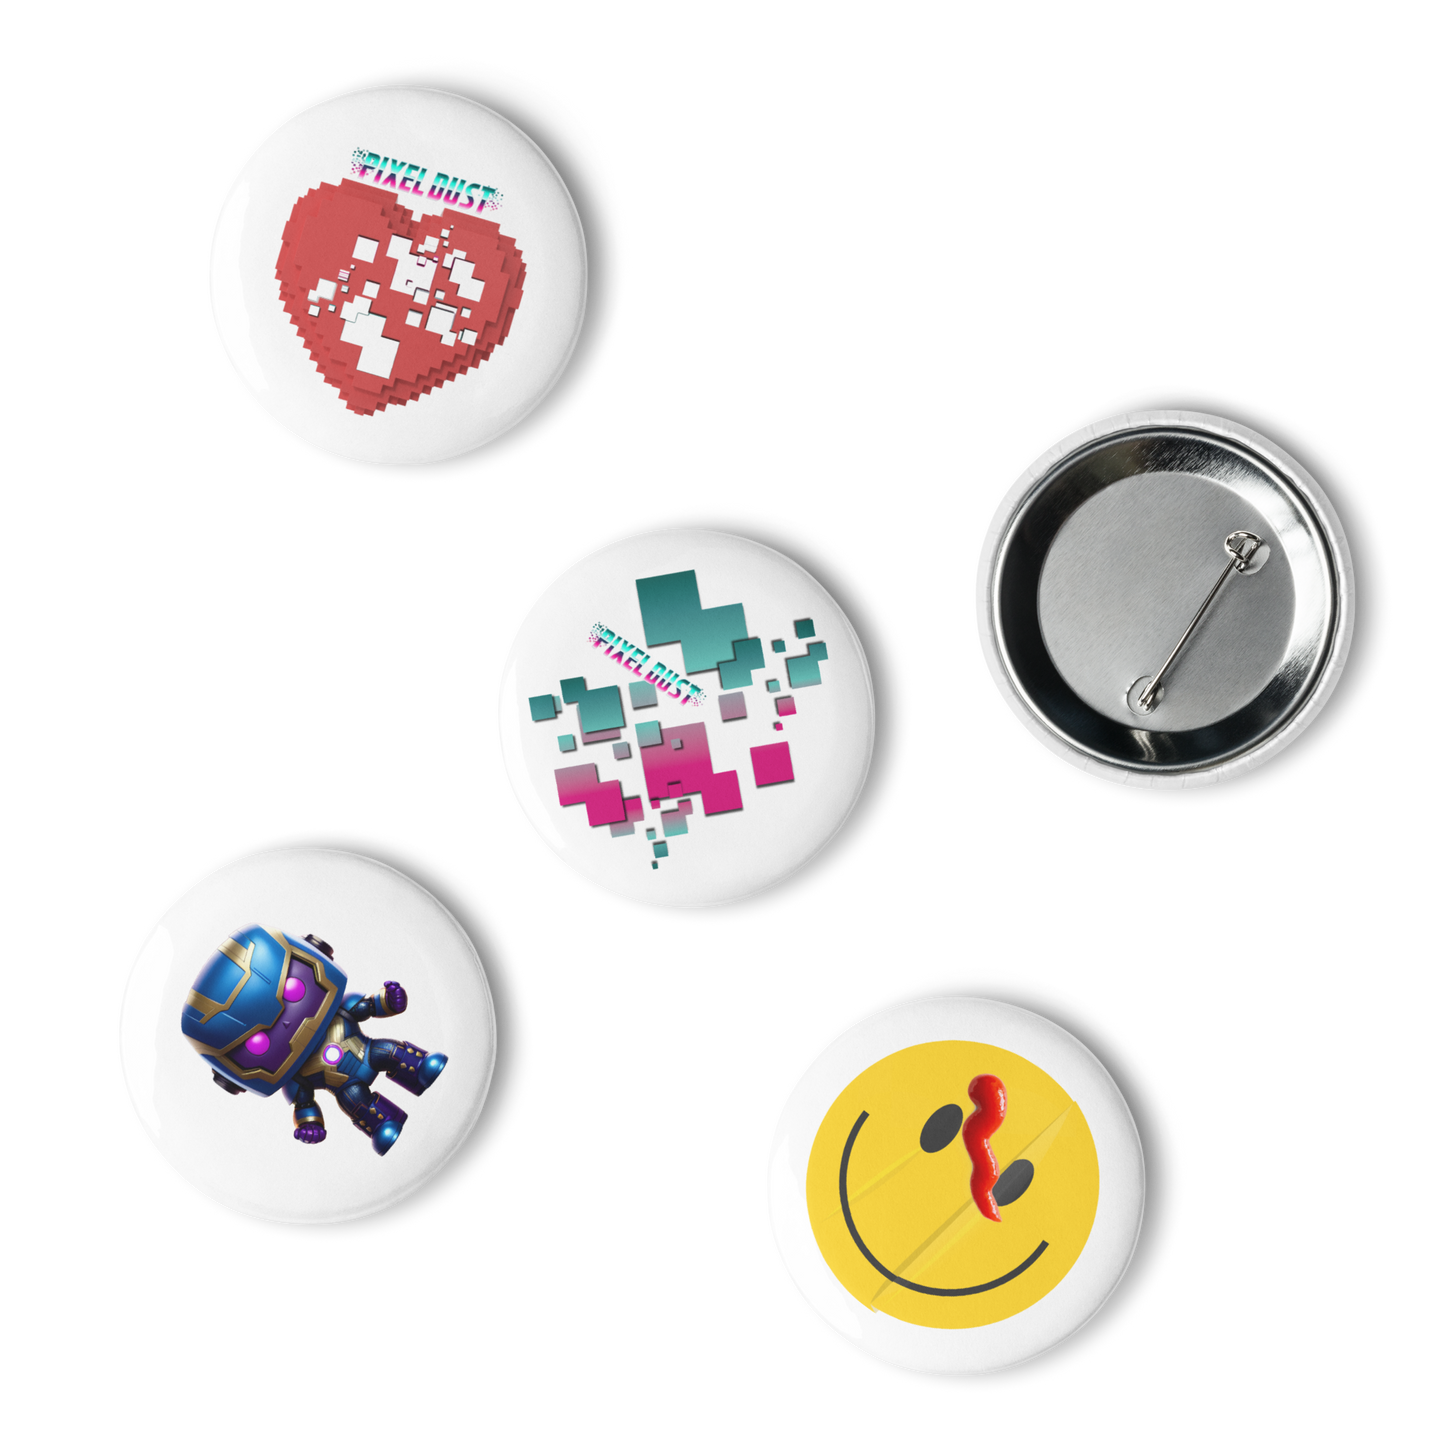 Limited Edition PixelDust Set of 5 pin buttons